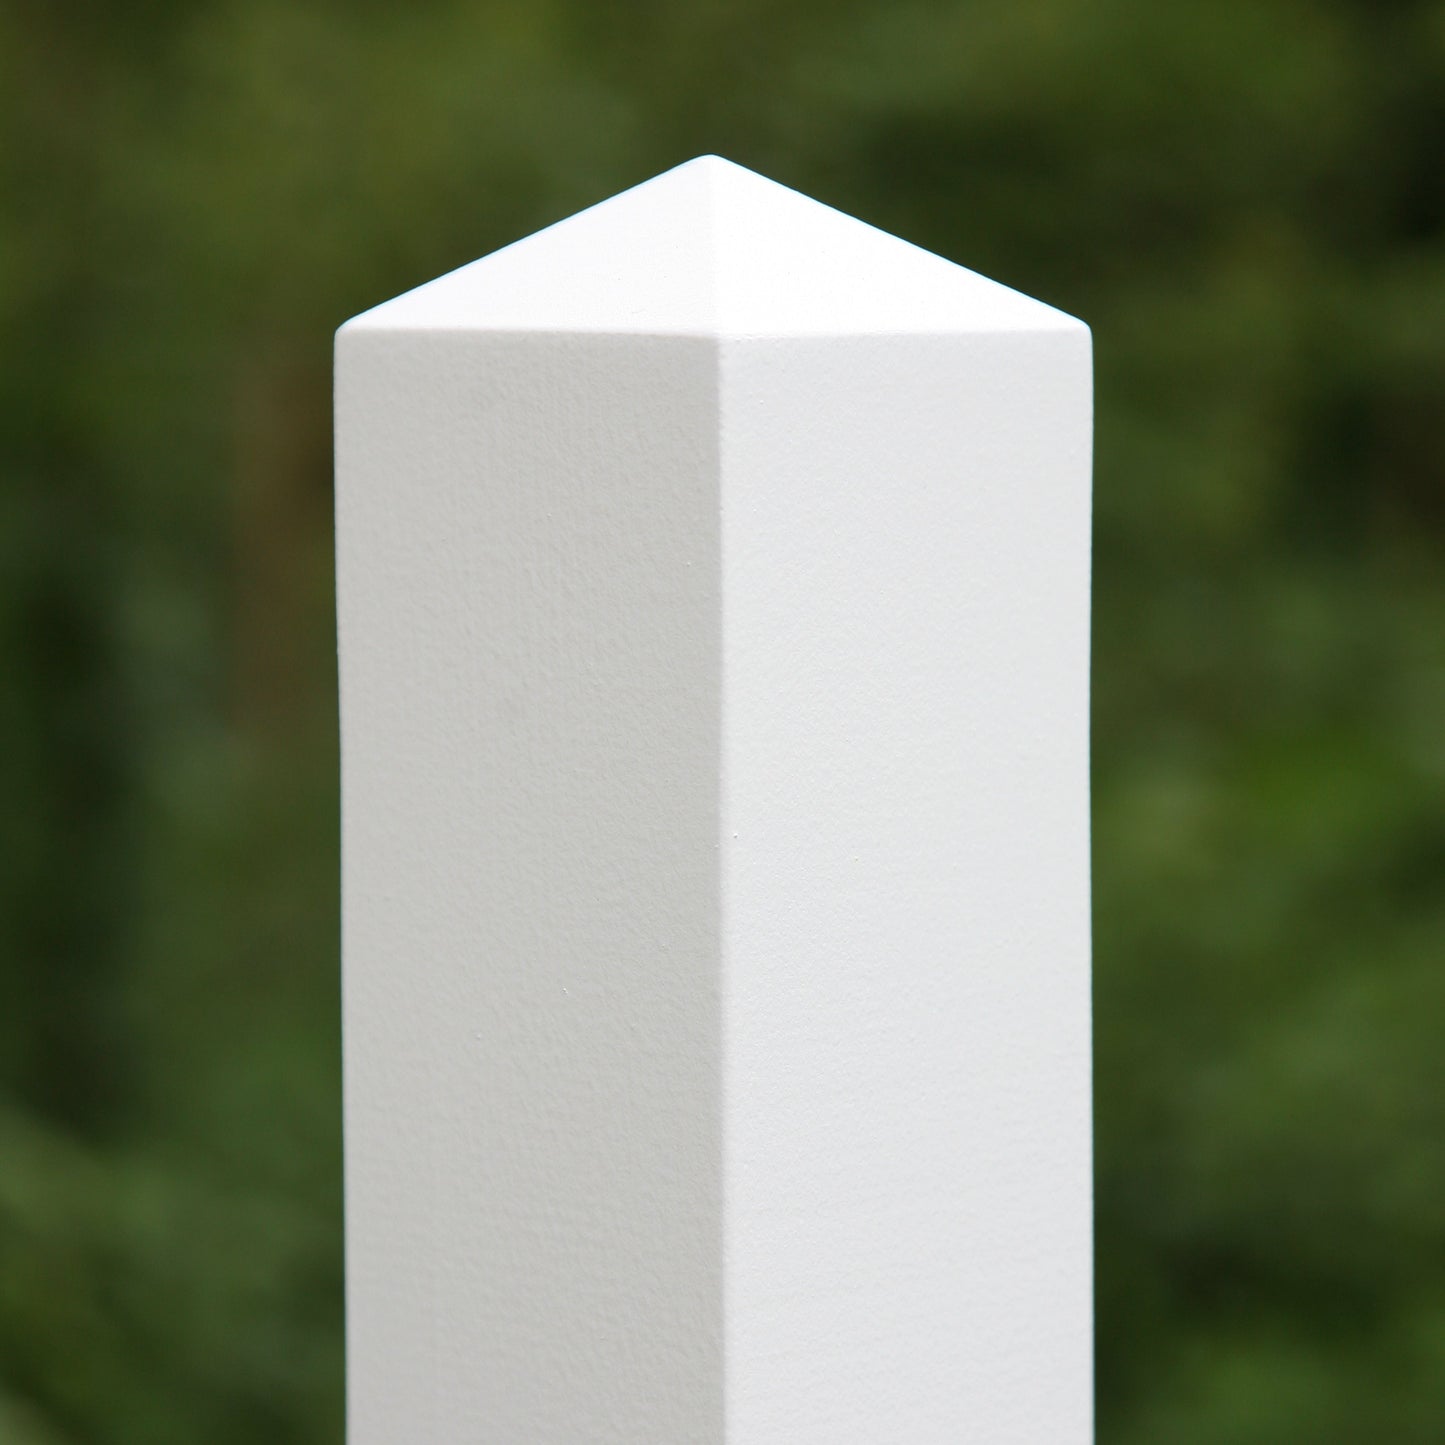 Fence Post 70 x 70mm Pyramid Top Finished White